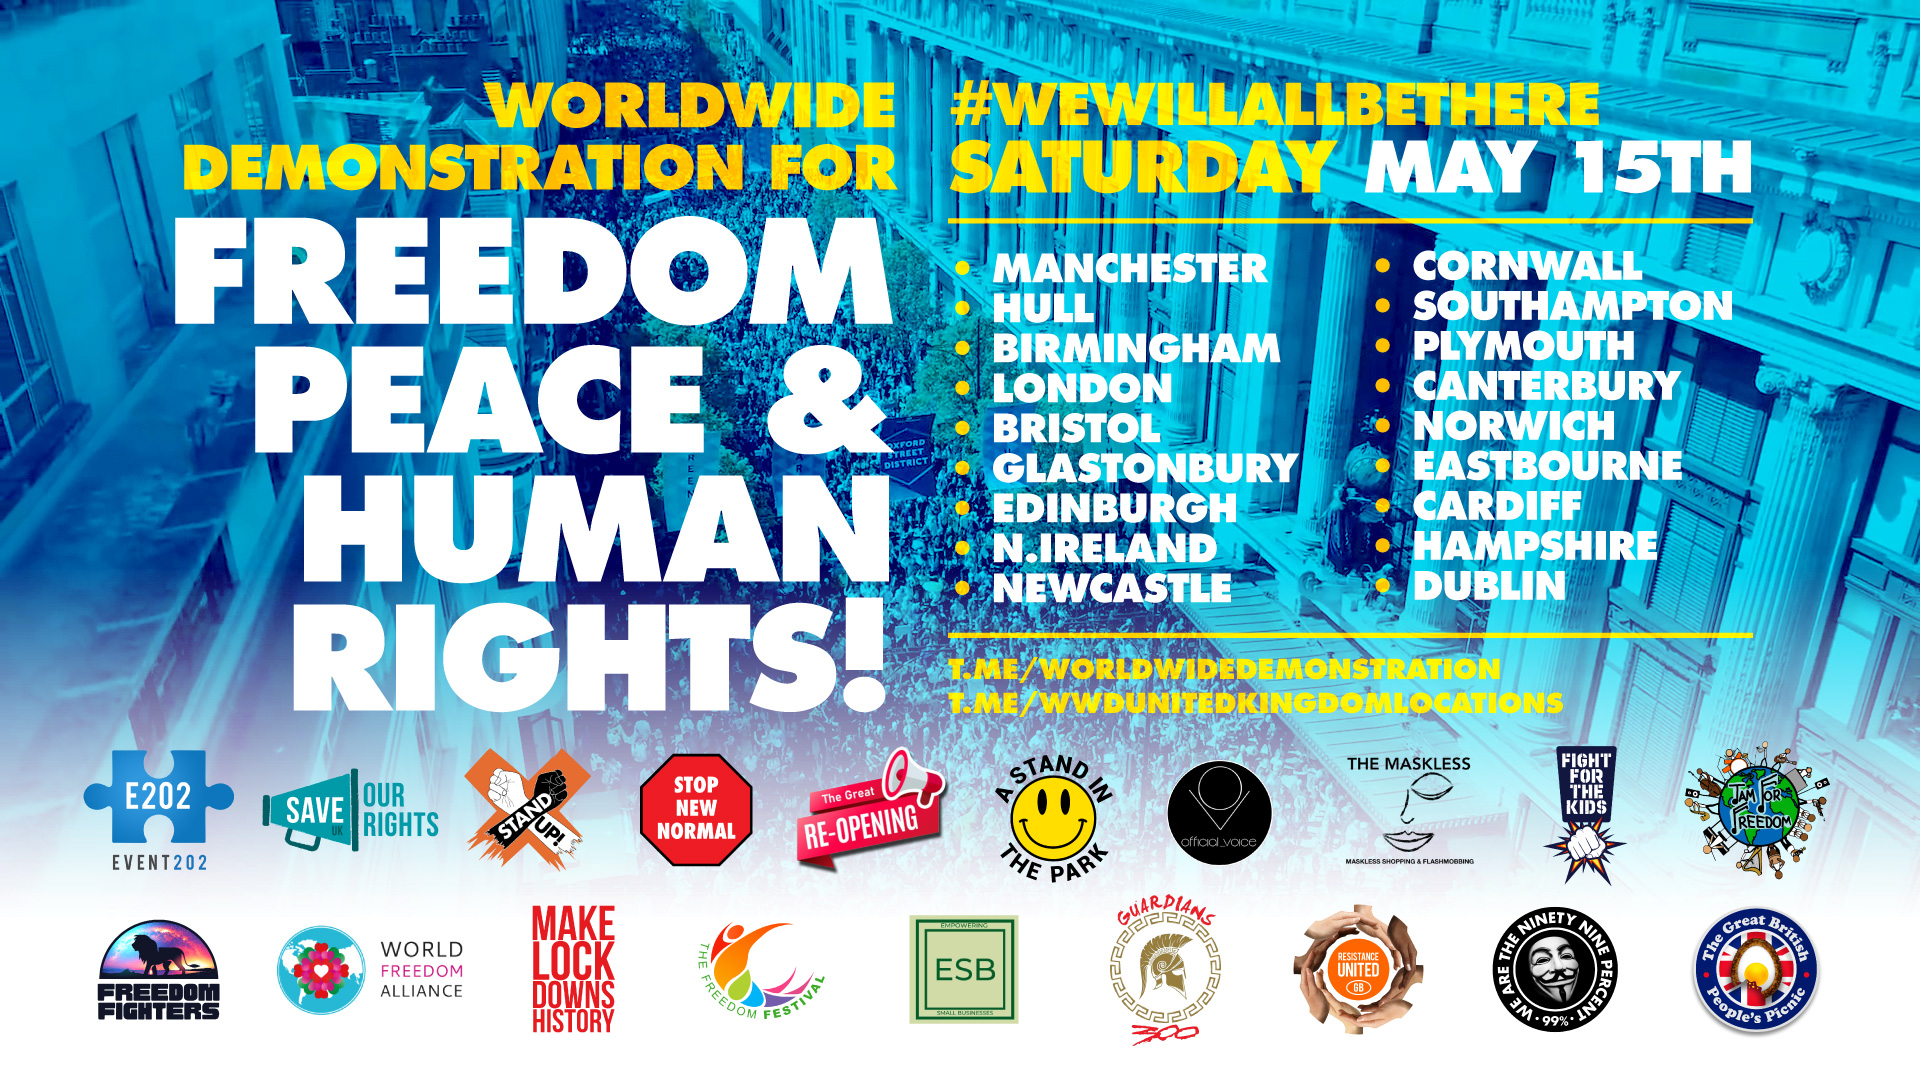 Worldwide Demonstration for Freedom, Peace & Human Rights